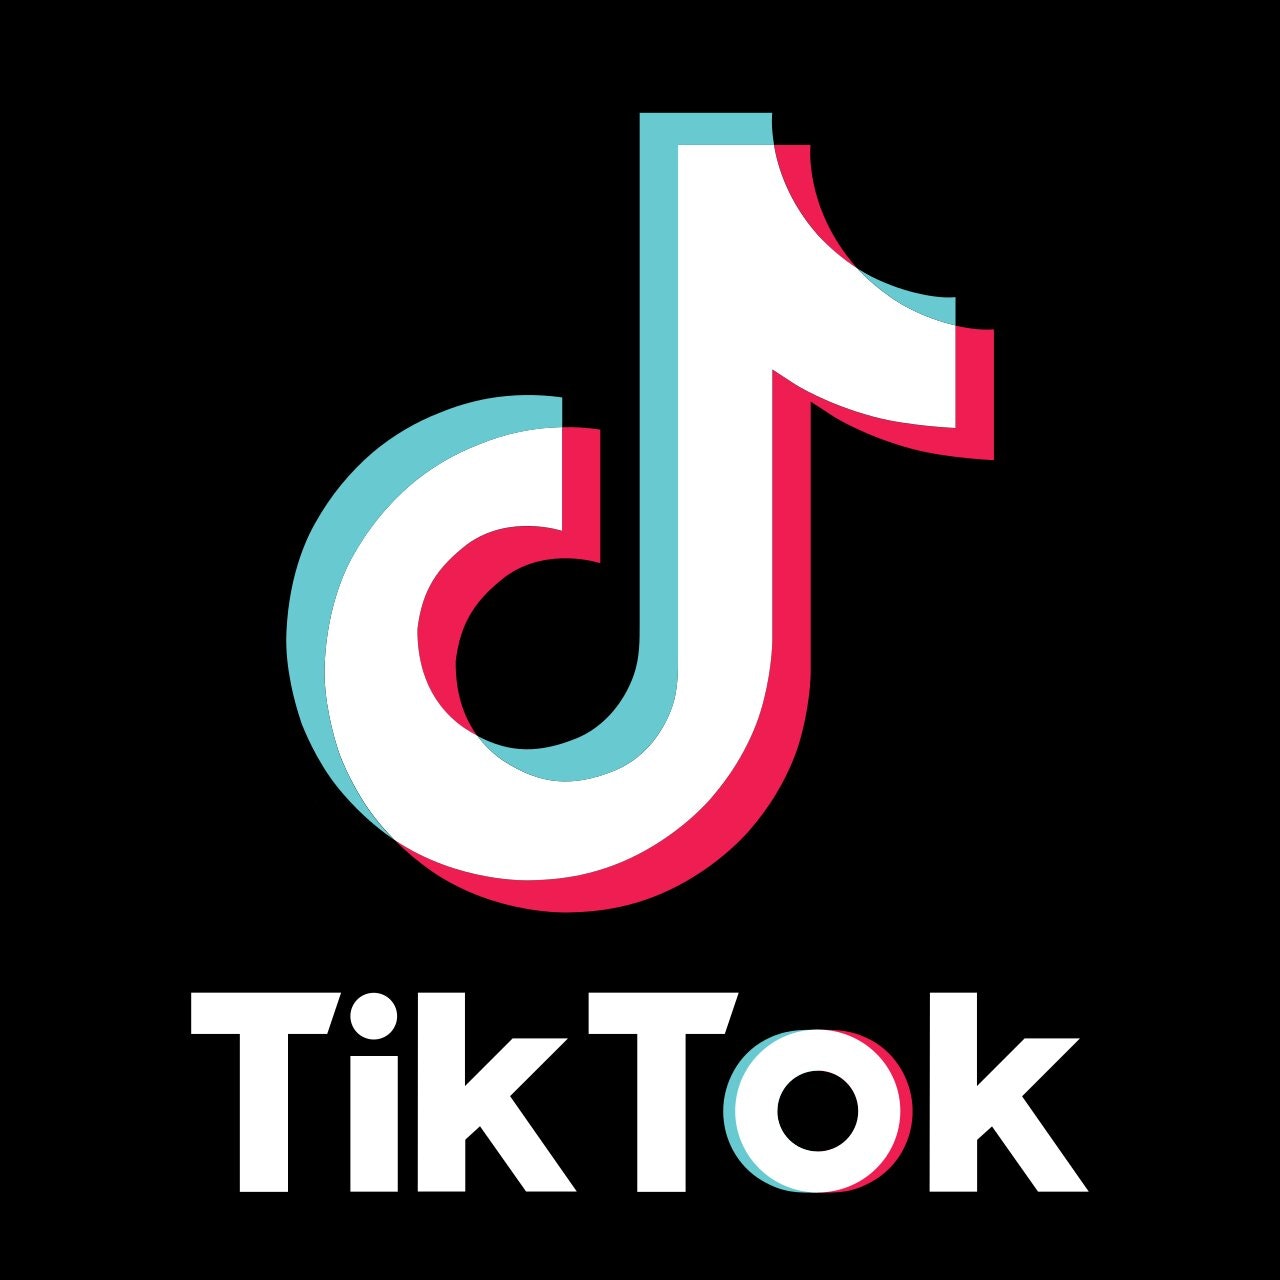 Will TikTok find a way to stay in the US?